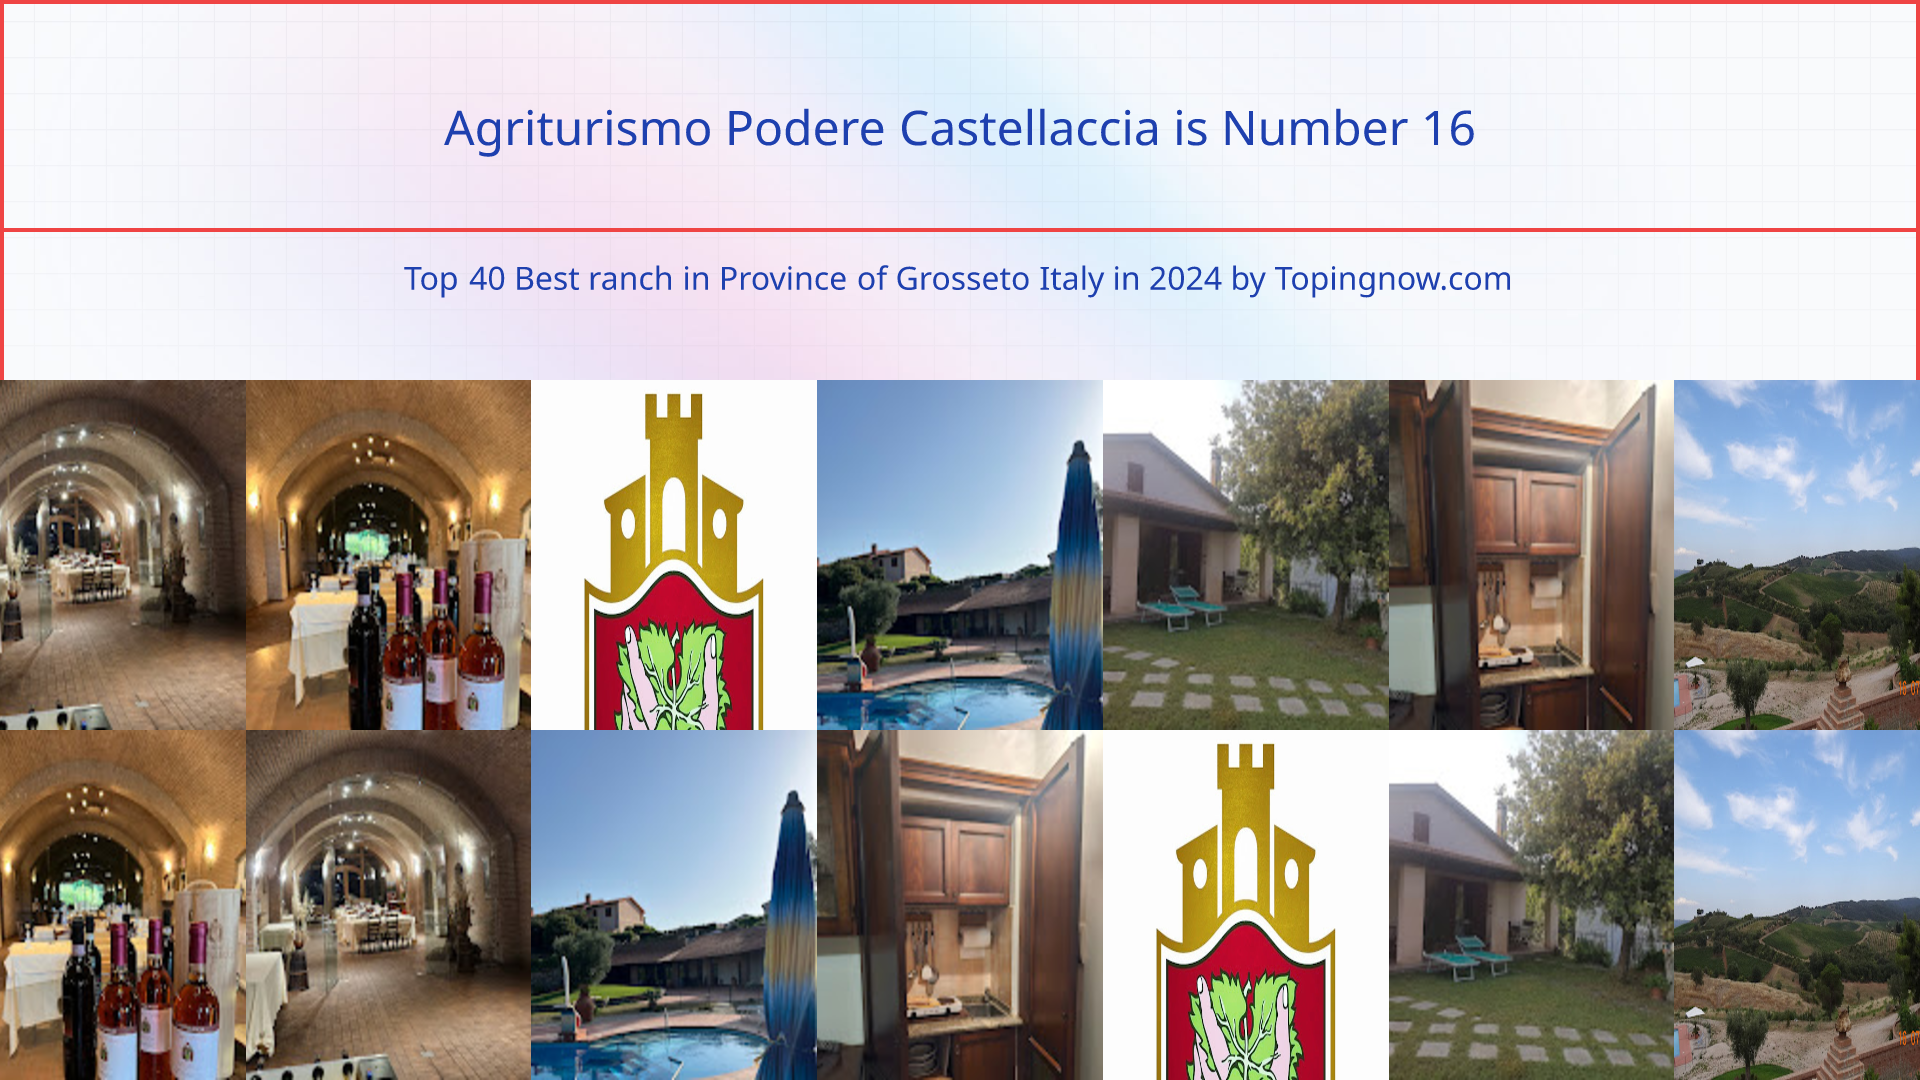 Agriturismo Podere Castellaccia: Top 40 Best ranch in Province of Grosseto Italy in 2024